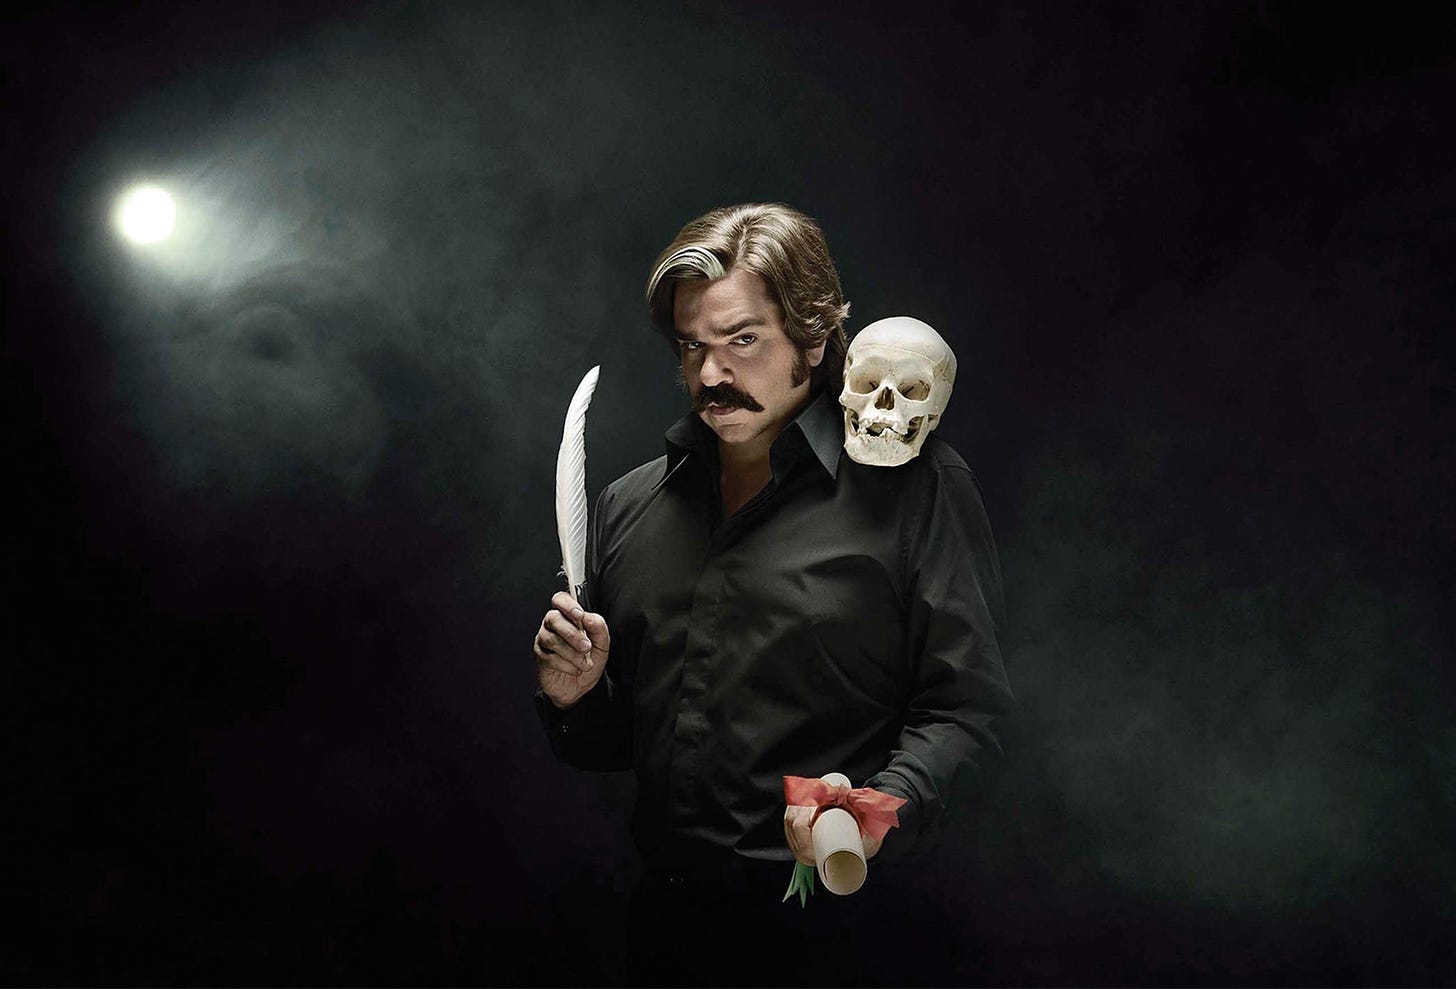 Image result for toast of london